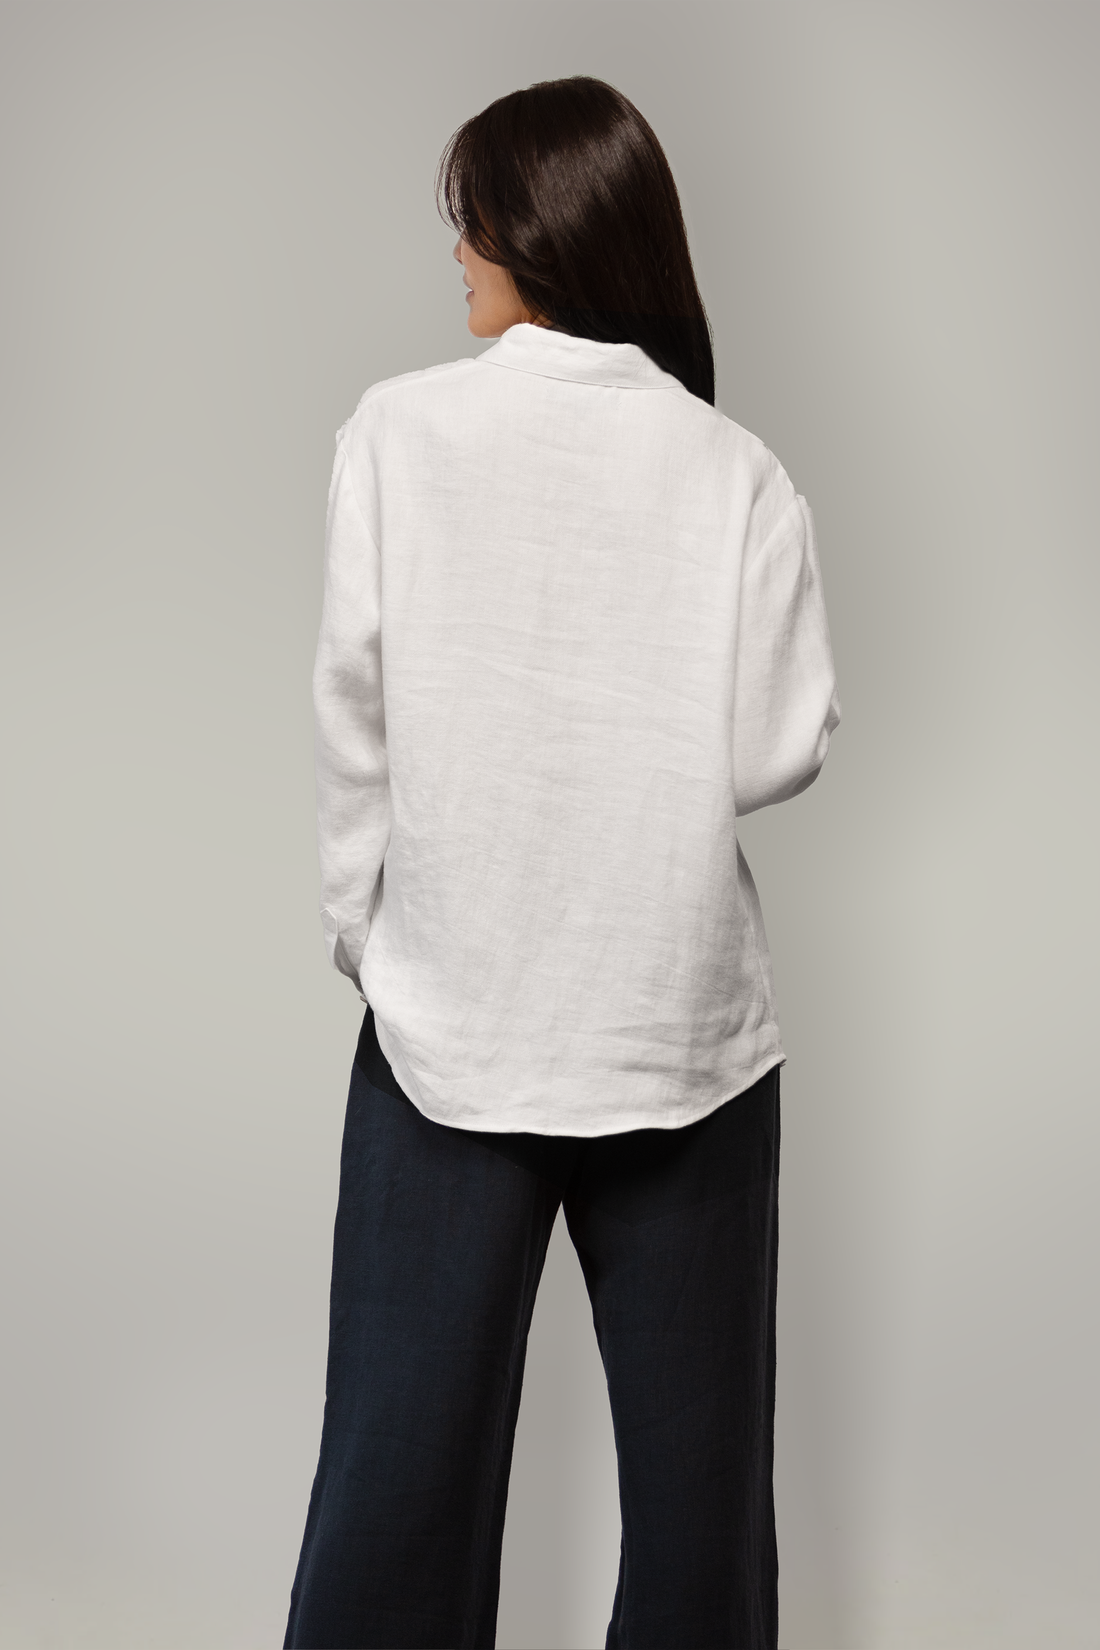 The Ethereal Linen Blouse